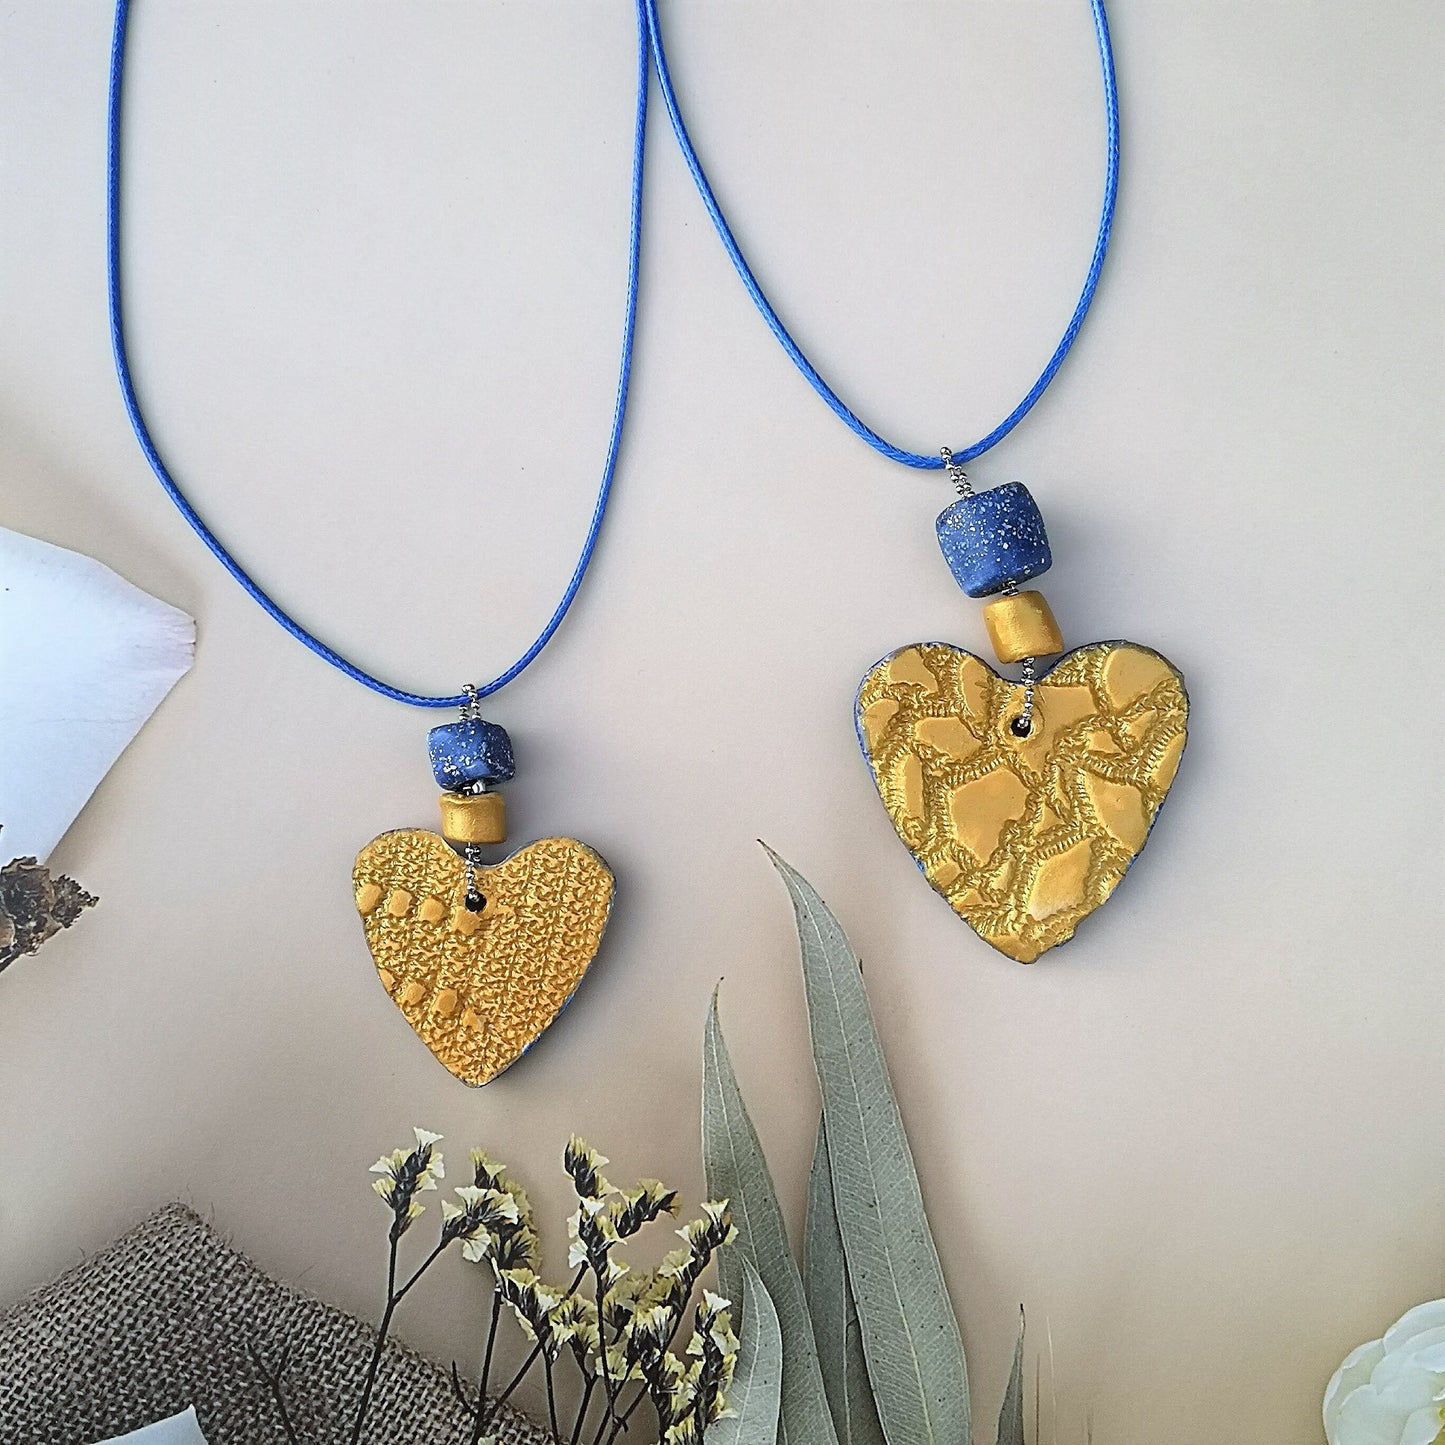 Statement Gold Heart Pendant Necklace For Women, Boho Clay Necklace, Everyday Necklace For Her, Cute Mother Day Gift From Daughter - Ceramica Ana Rafael